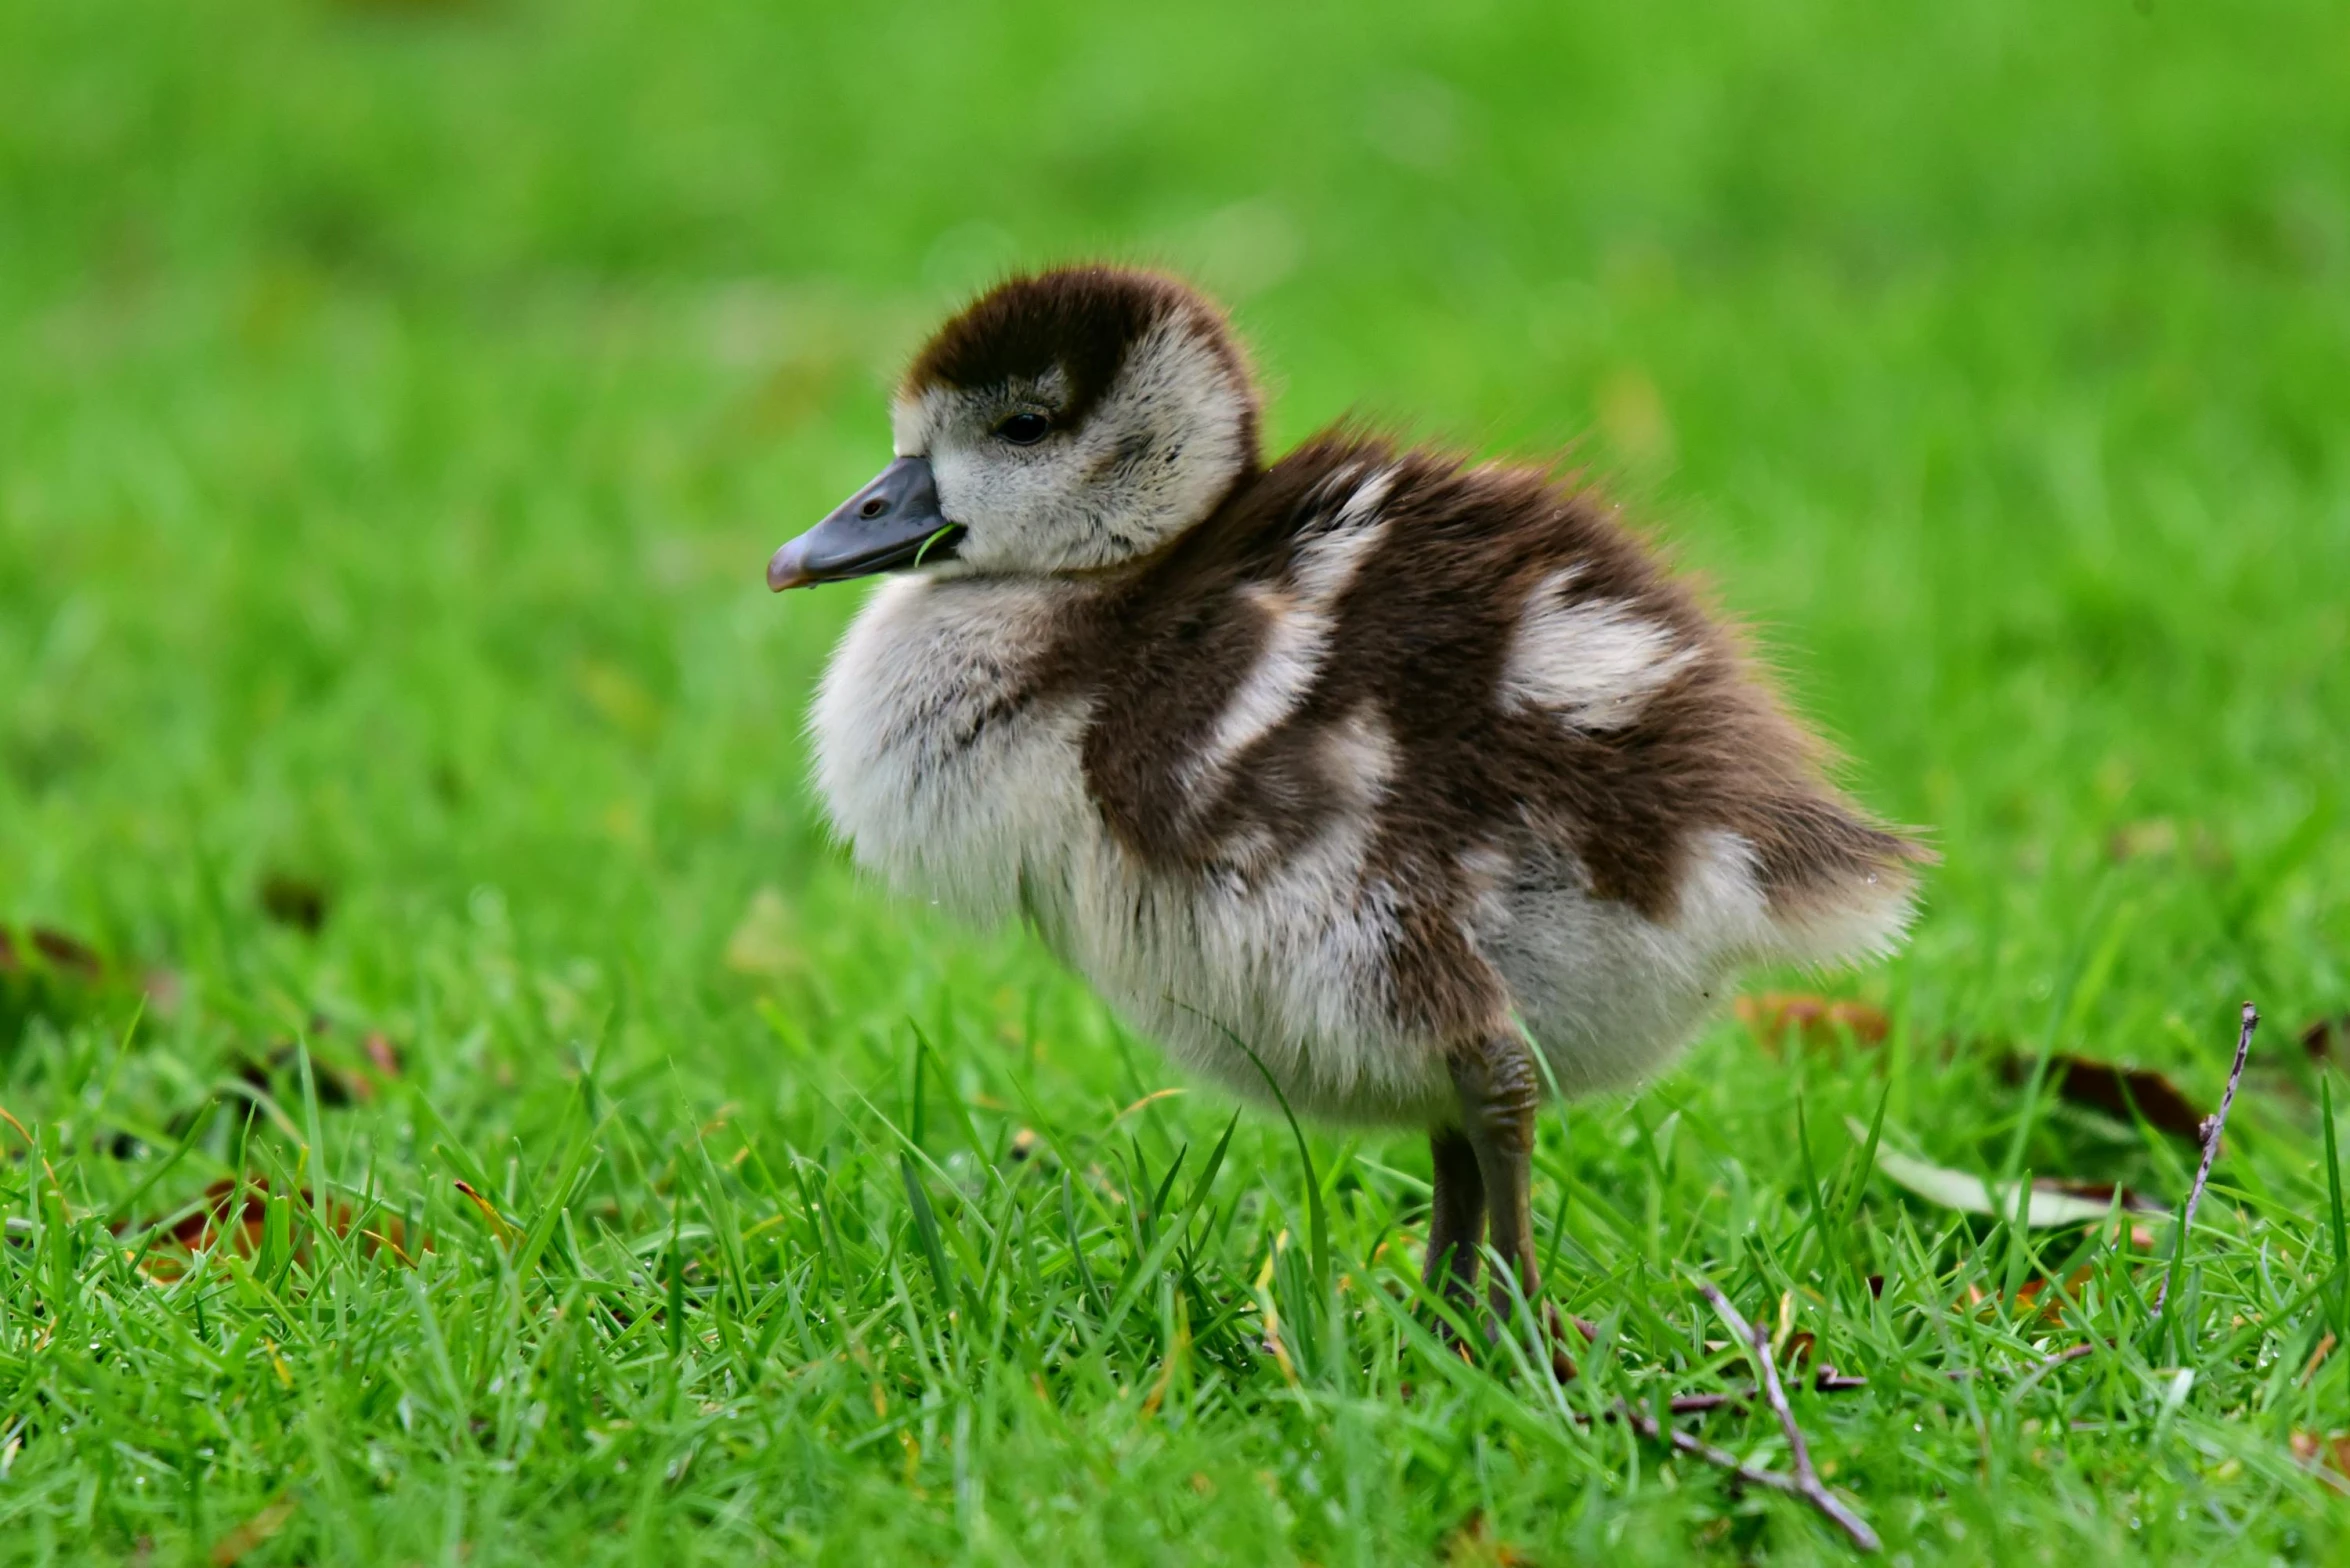 a little baby duck in the grass is looking around